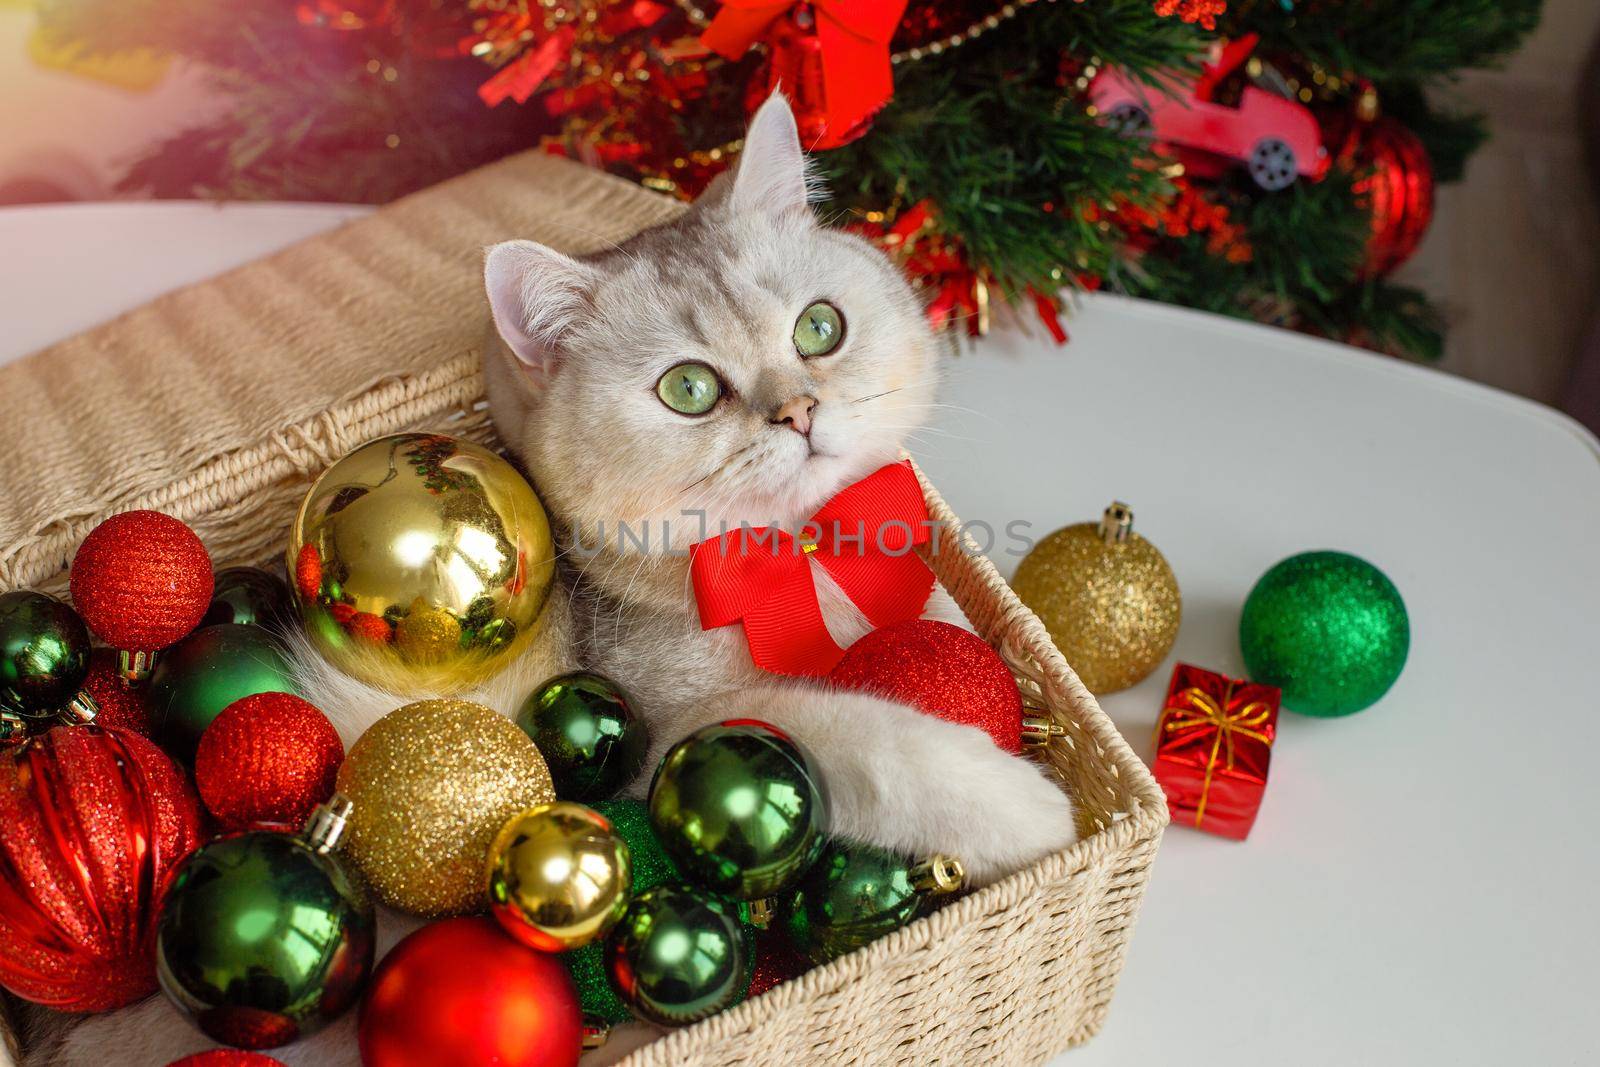 A beautiful white cat in a red bow tie lies in a wicker basket near a Christmas tree, in multi-colored Christmas balls.